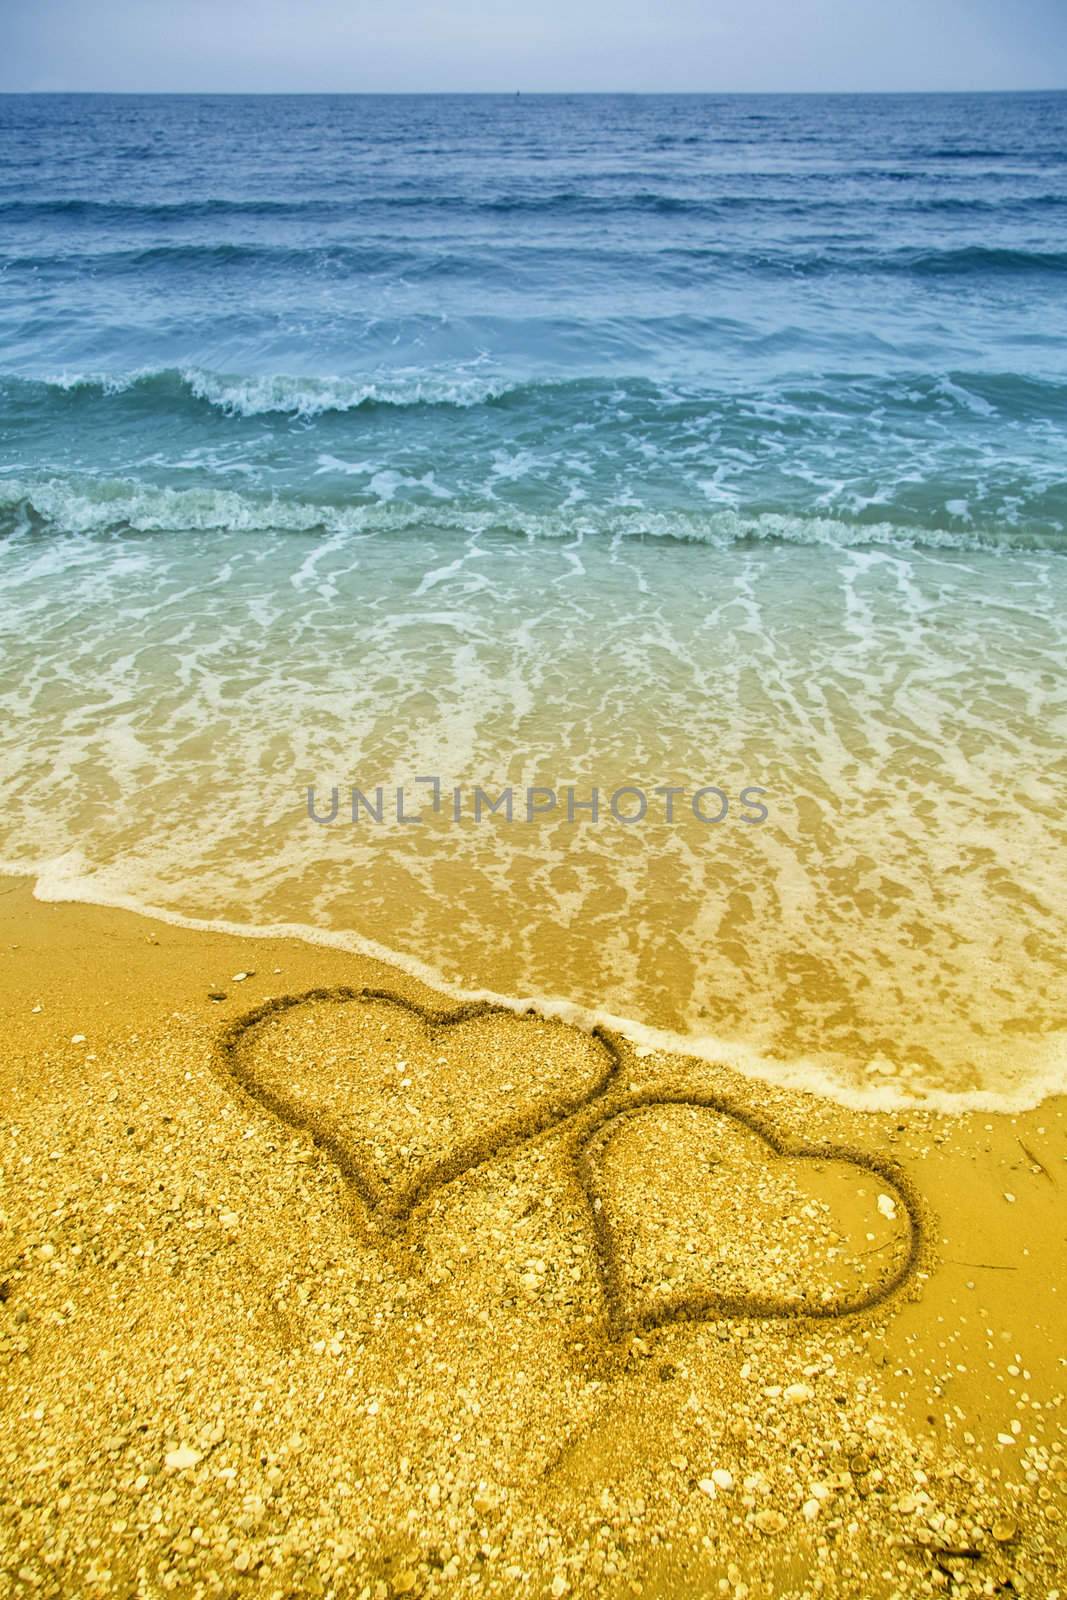 Drawing of two hearts in the sand on beach